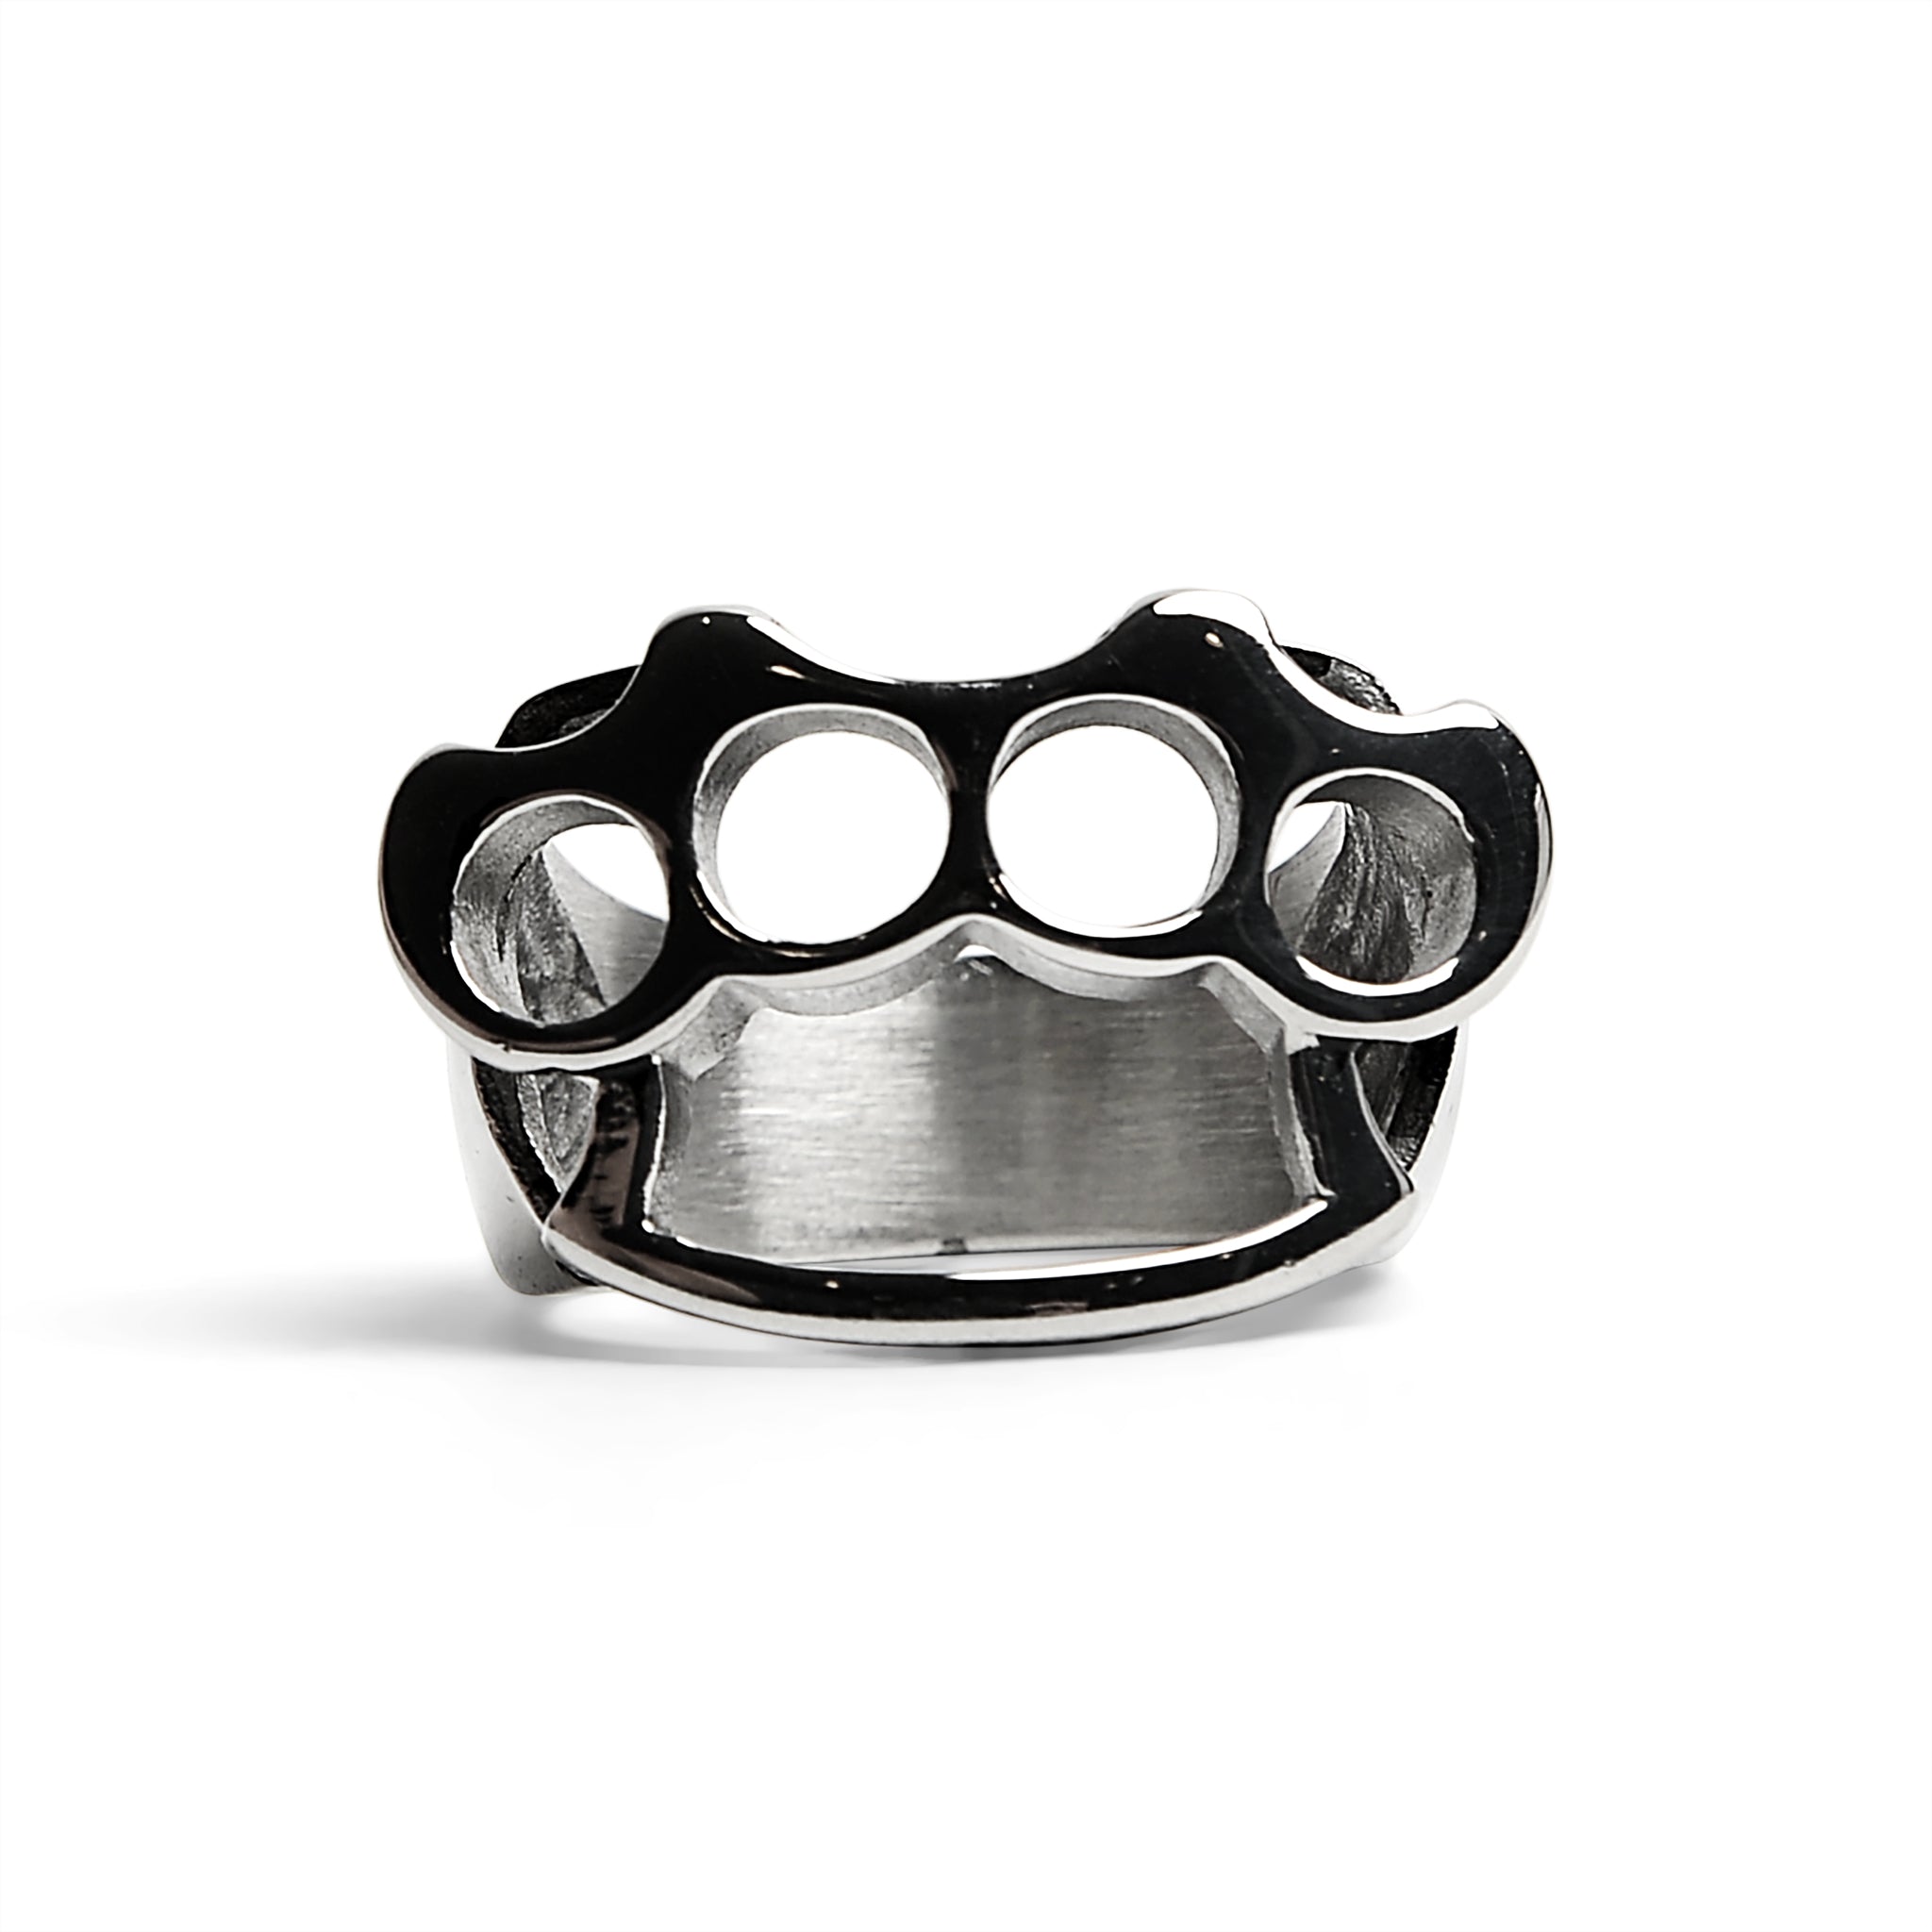 Stainless Steel Knuckle Duster Ring - Polished Finish, Durable, Hypoallergenic, 316L Surgical Steel Blend - Jewelry & Watches - Bijou Her -  -  - 